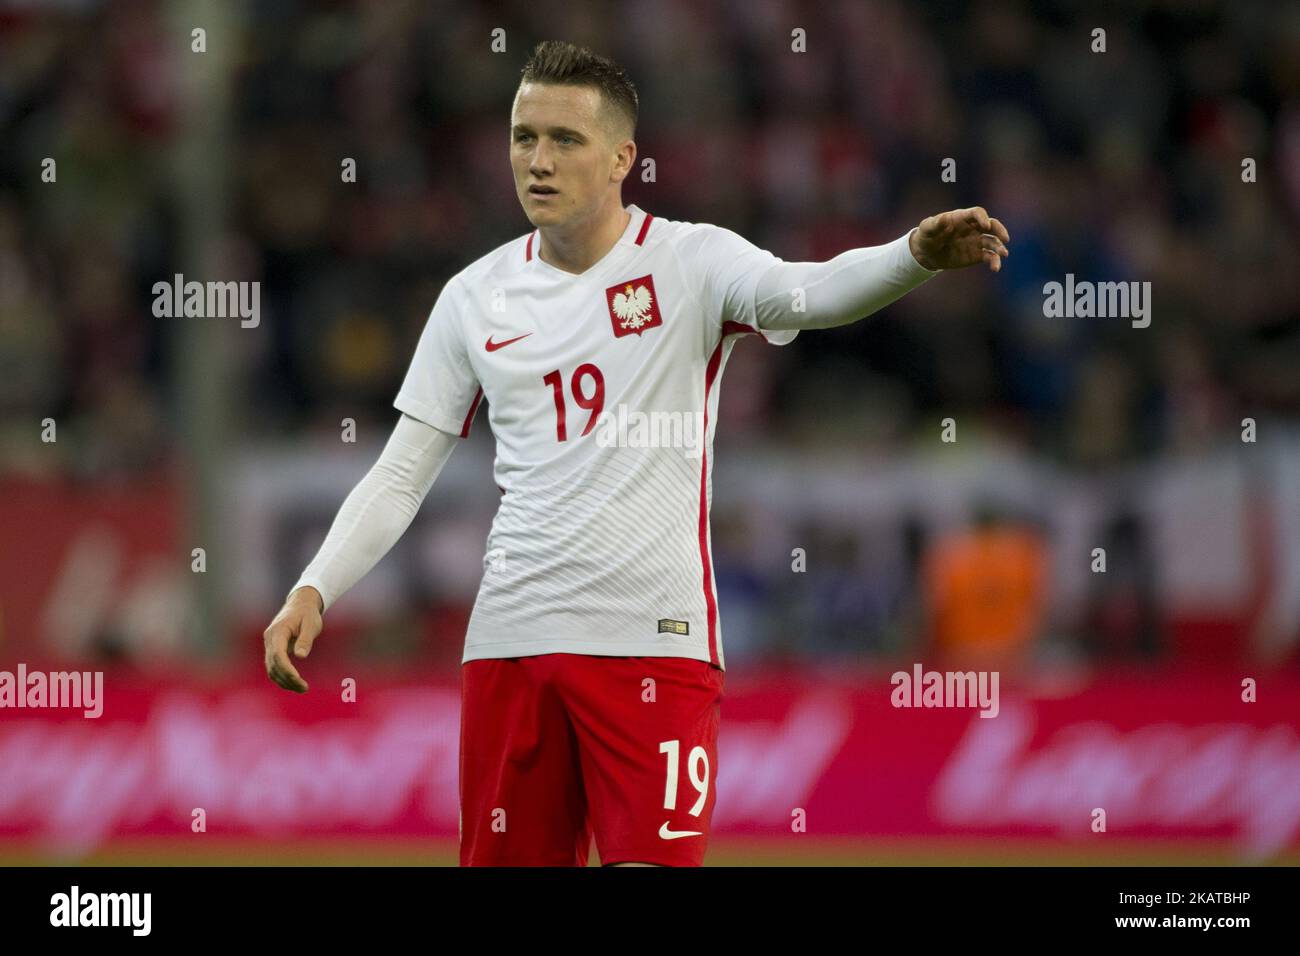 Piotr Zielinski of Poland during the International Friendly match between Poland and Mexico at Energa Stadium in Gdansk, Poland on November 13, 2017 (Photo by Andrew Surma/NurPhoto) Stock Photo